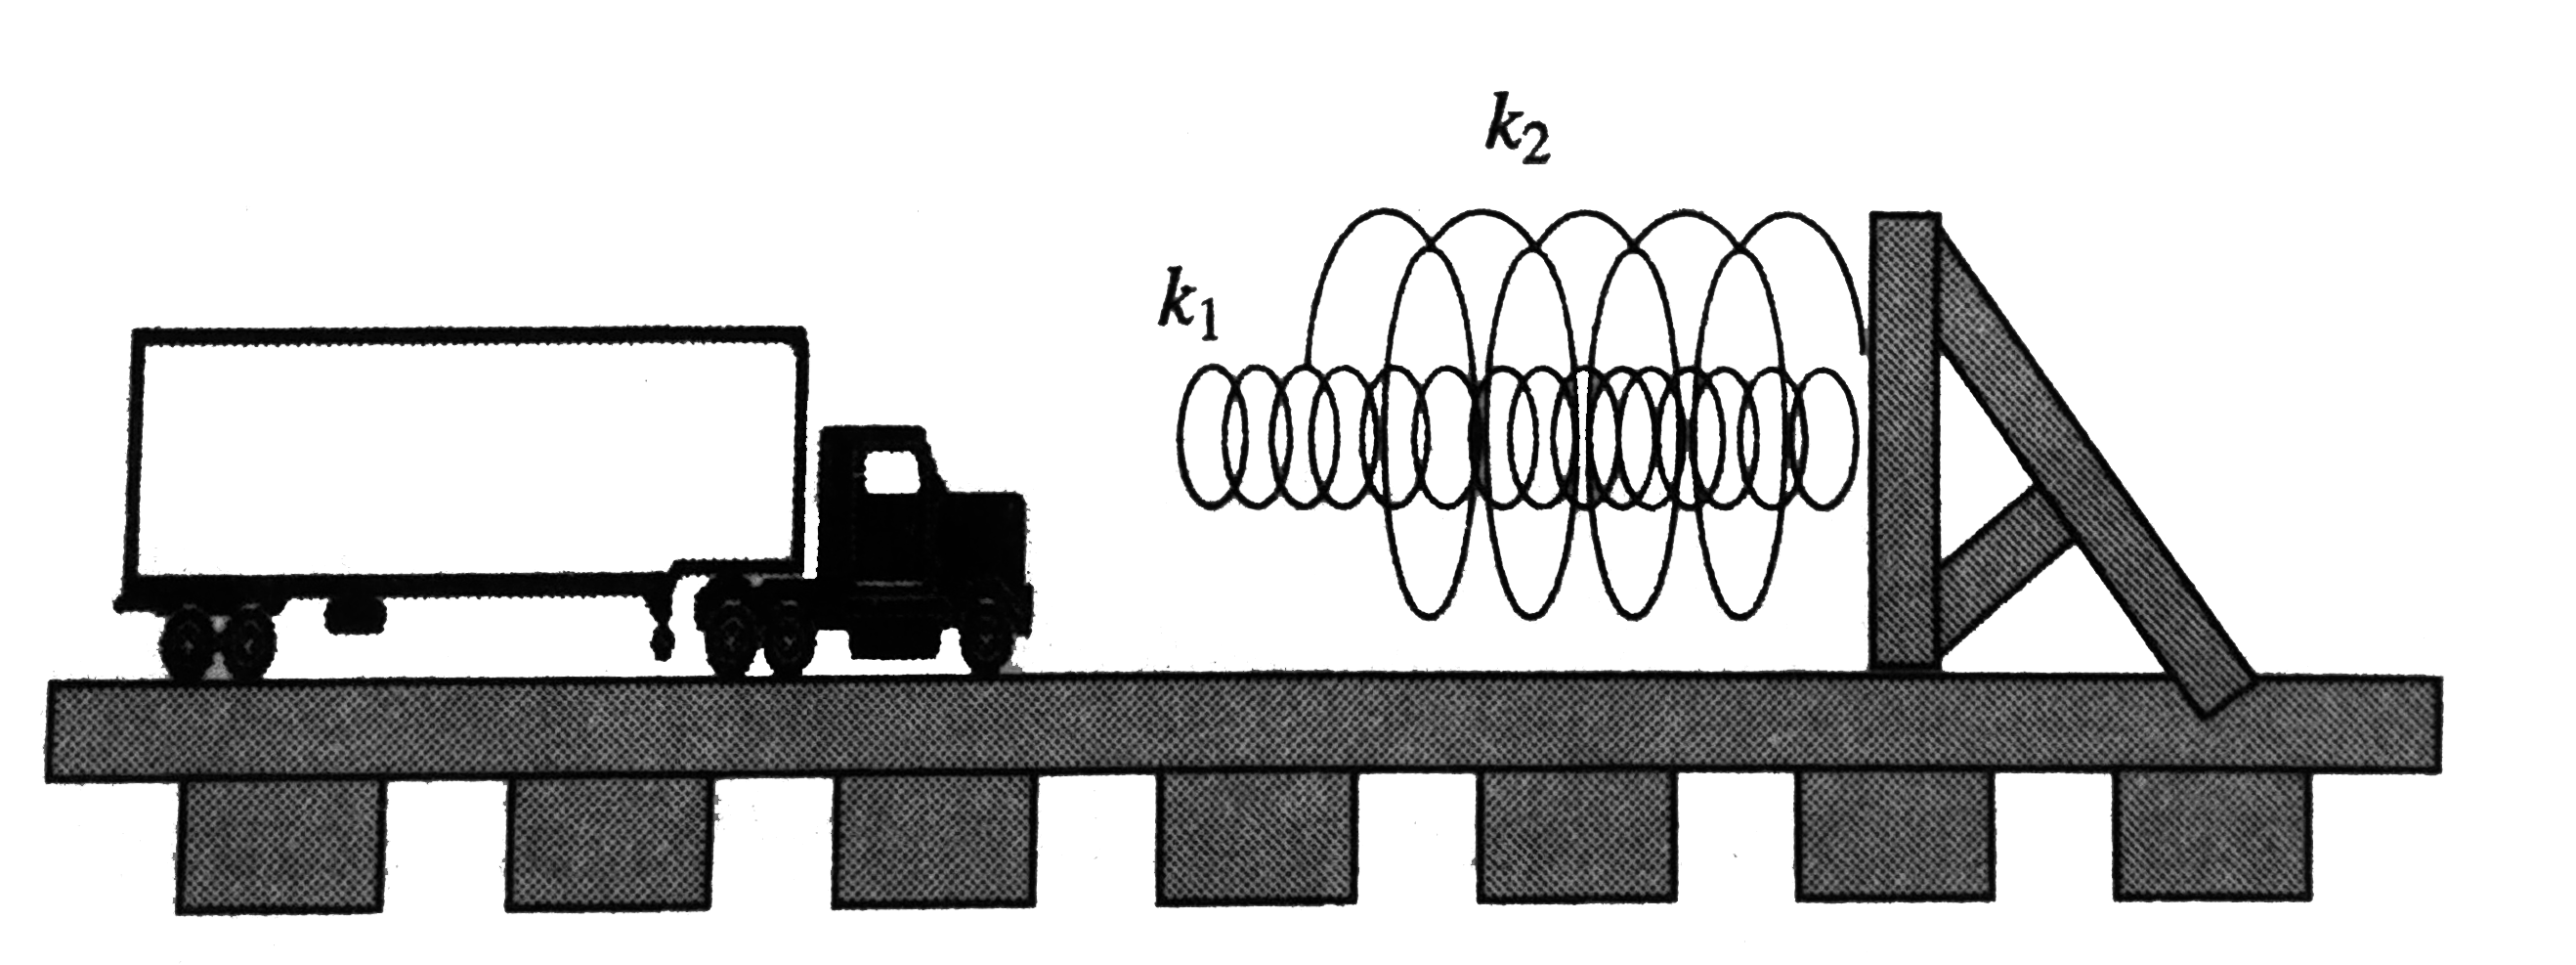 A 2144kg freight car roles along rails with negligible friction. The car is brought to rest by a combination of two coiled springs as illustrated in figure. Both springs are described by Hooke's law with k1=1600Nm^-1 and k2=3400Nm^-1. After the first spring compresses a distance of 30.0cm, the second spring acts with the first to increase the force as additional compression occurs as shown in the graph in figure. The car comes to rest 50.0cm after first contracting the two-spring system. Find the car's initial speed (i n xx10^-1Nm^-1).